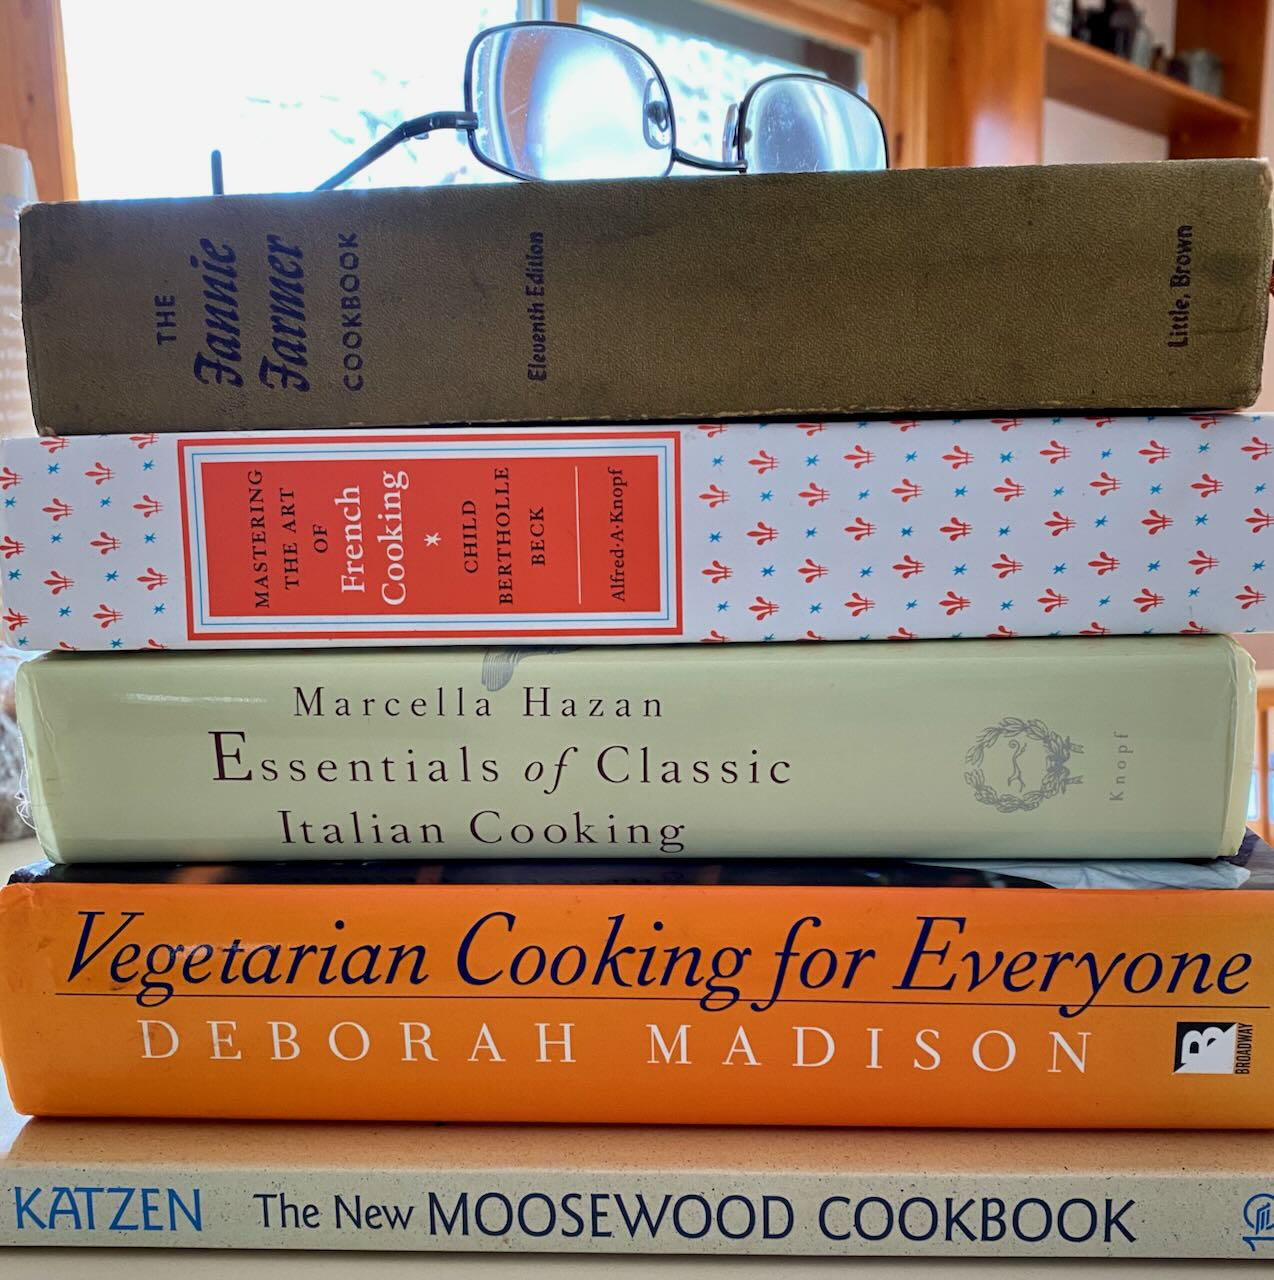 Stack of Cookbooks and Pair of Glasses